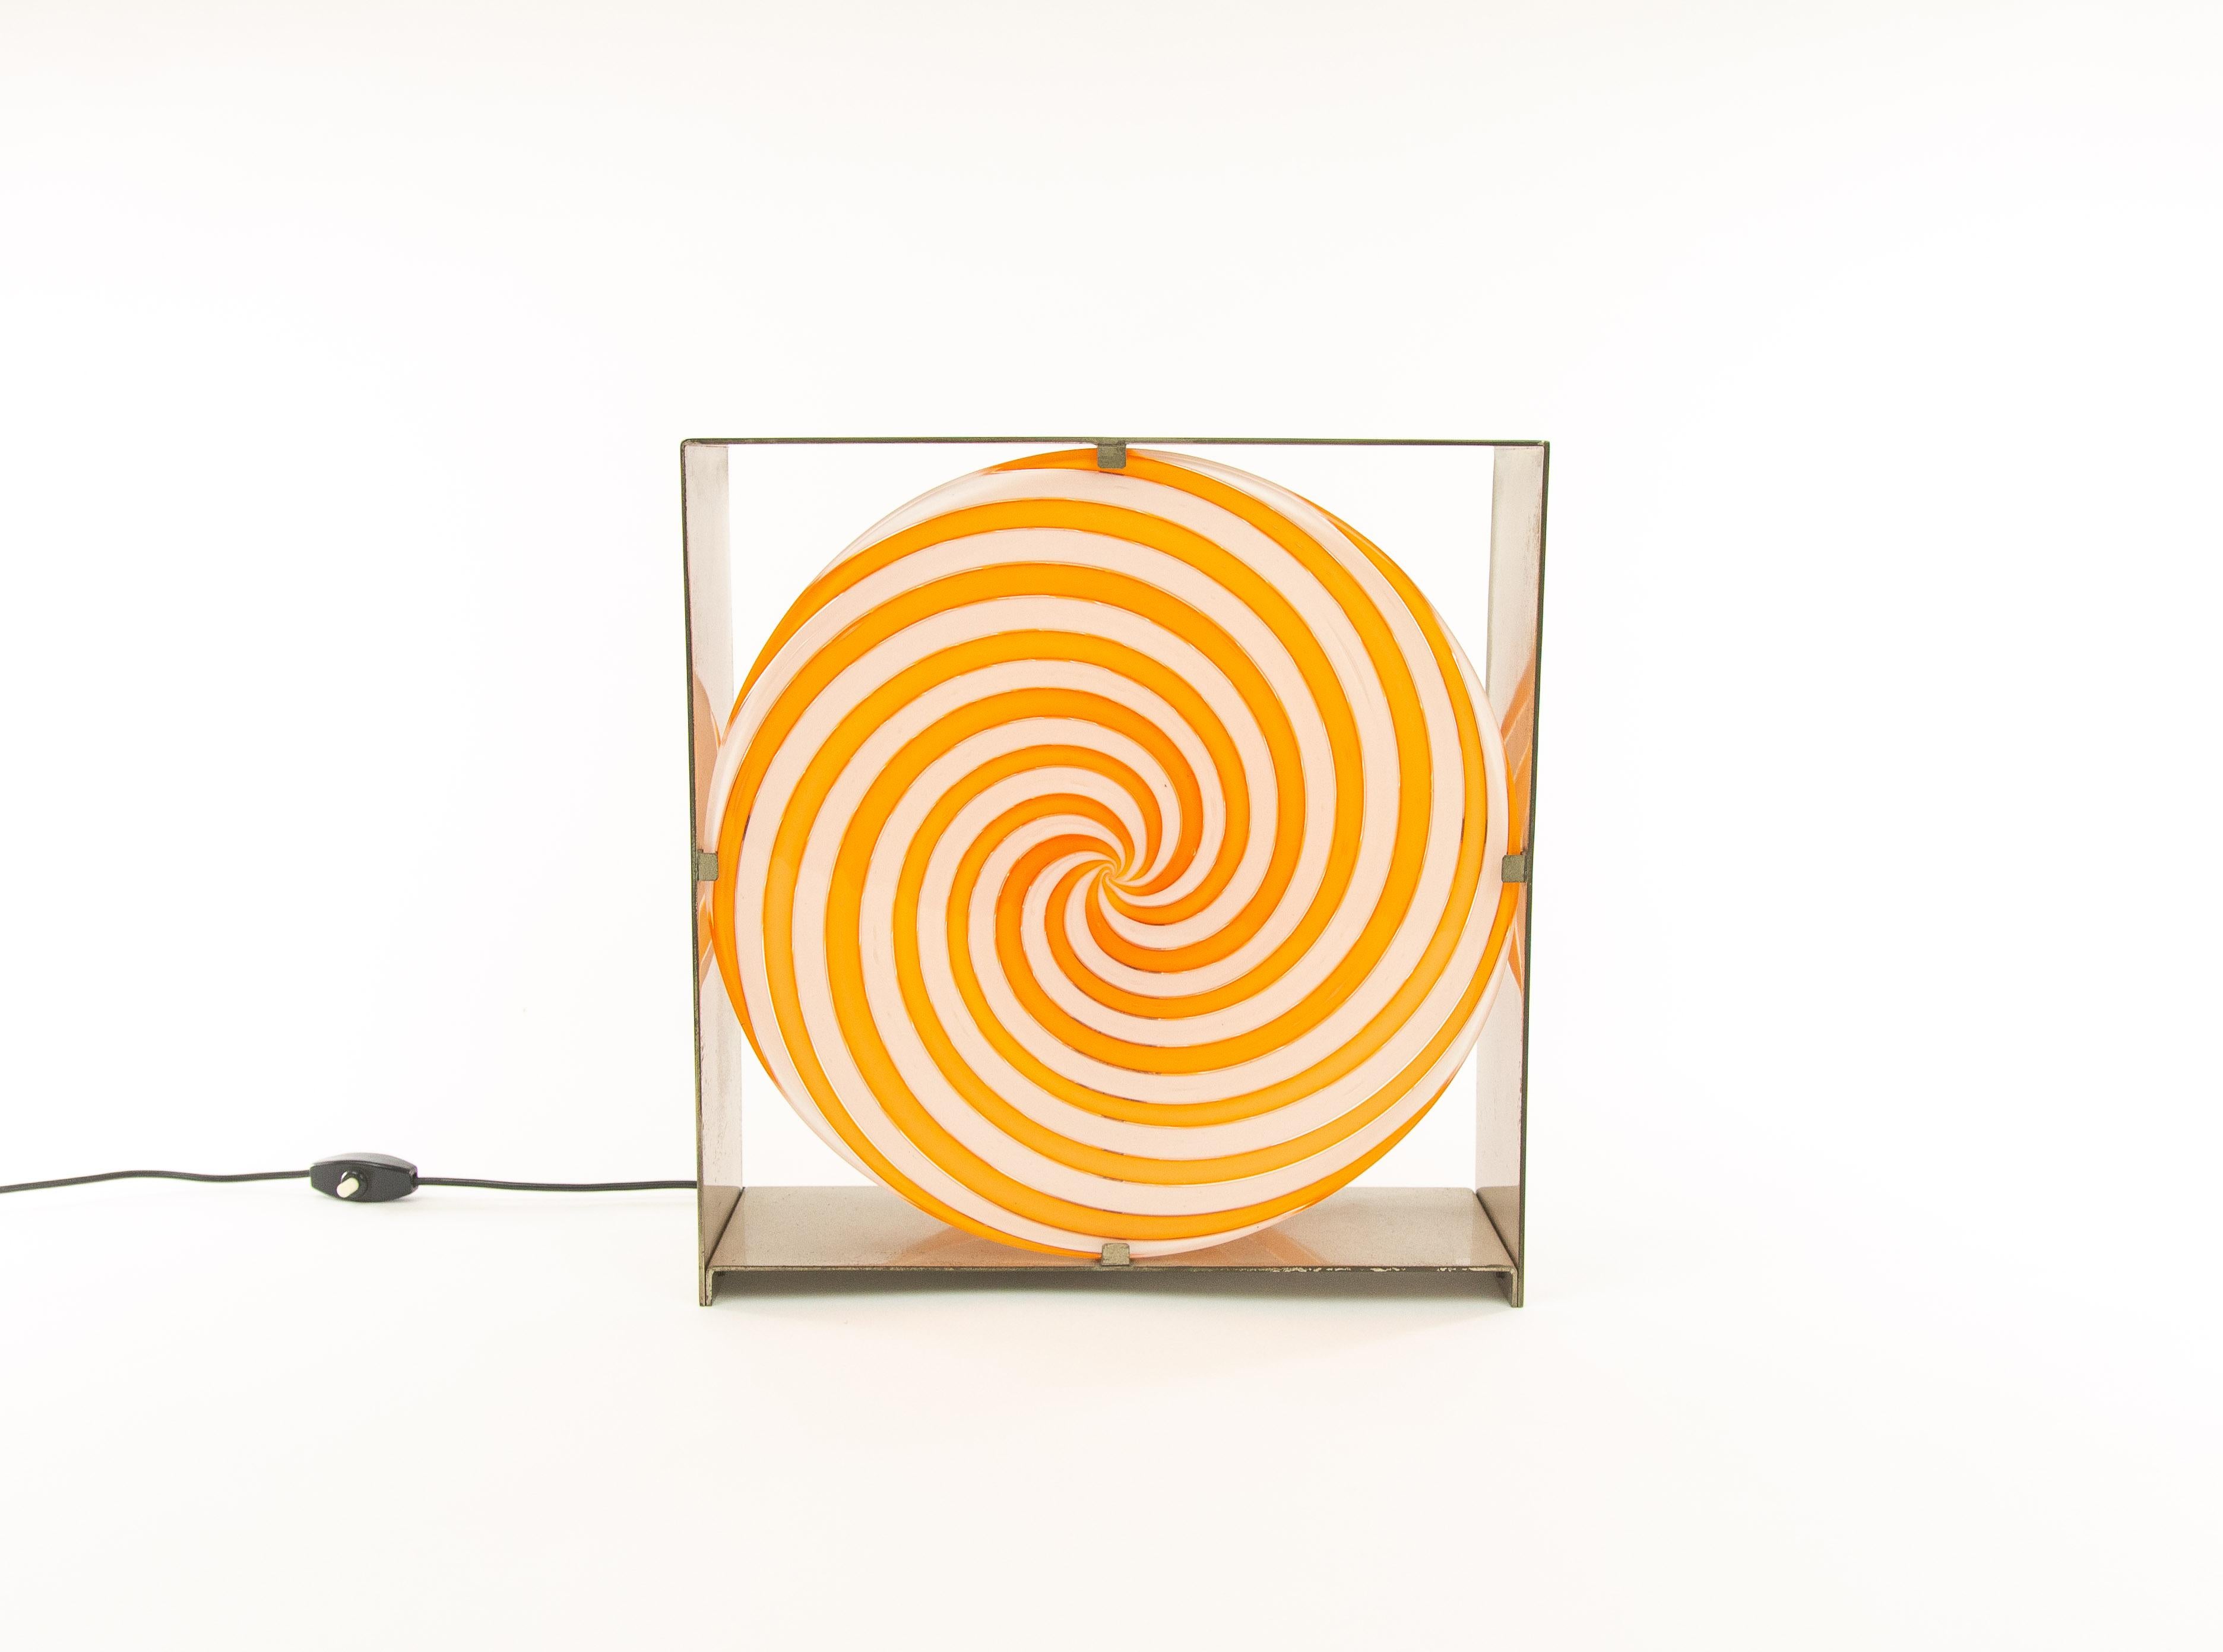 Orange spiral table lamp, model LT 217, by Muranese glass designer Carlo Nason for A.V. Mazzega in the 1960s.

This striking object is made of a nickel-plated brushed metal construction that holds two discs made of Murano glass. The orange spiral